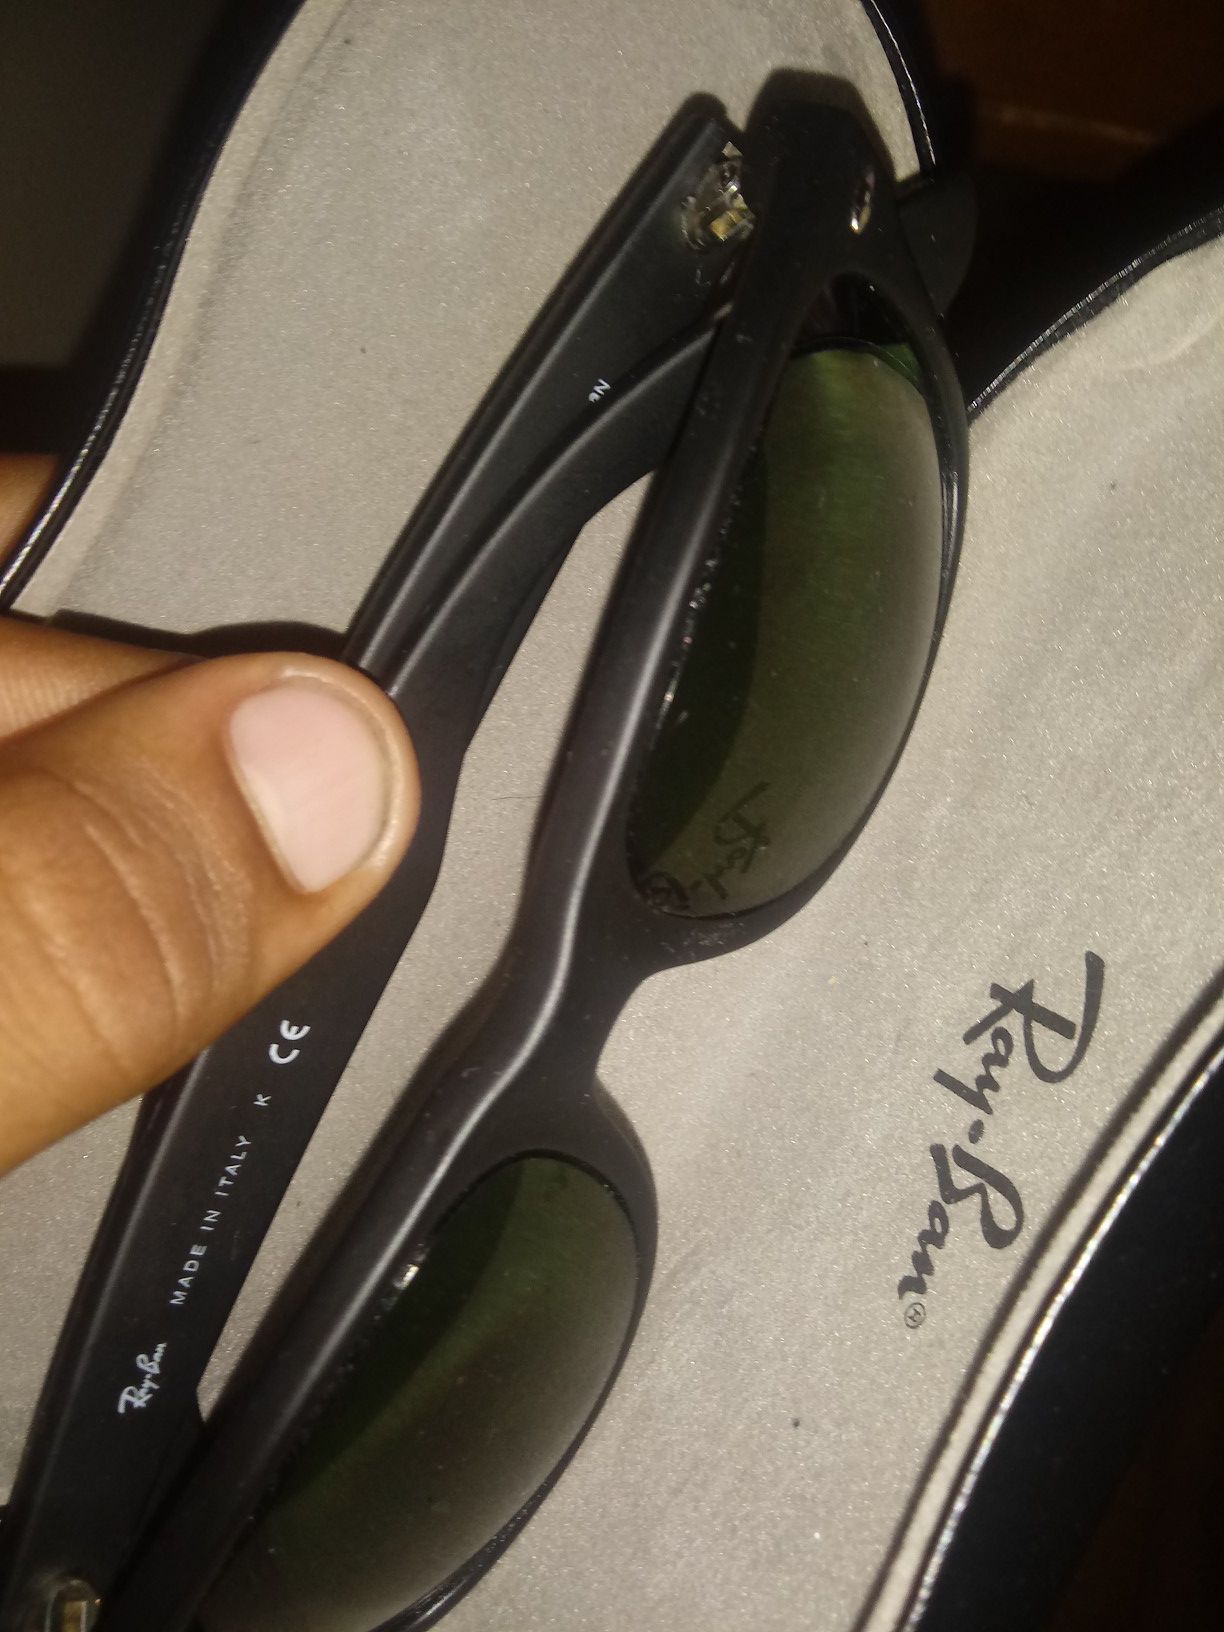 Ray ban made in italy